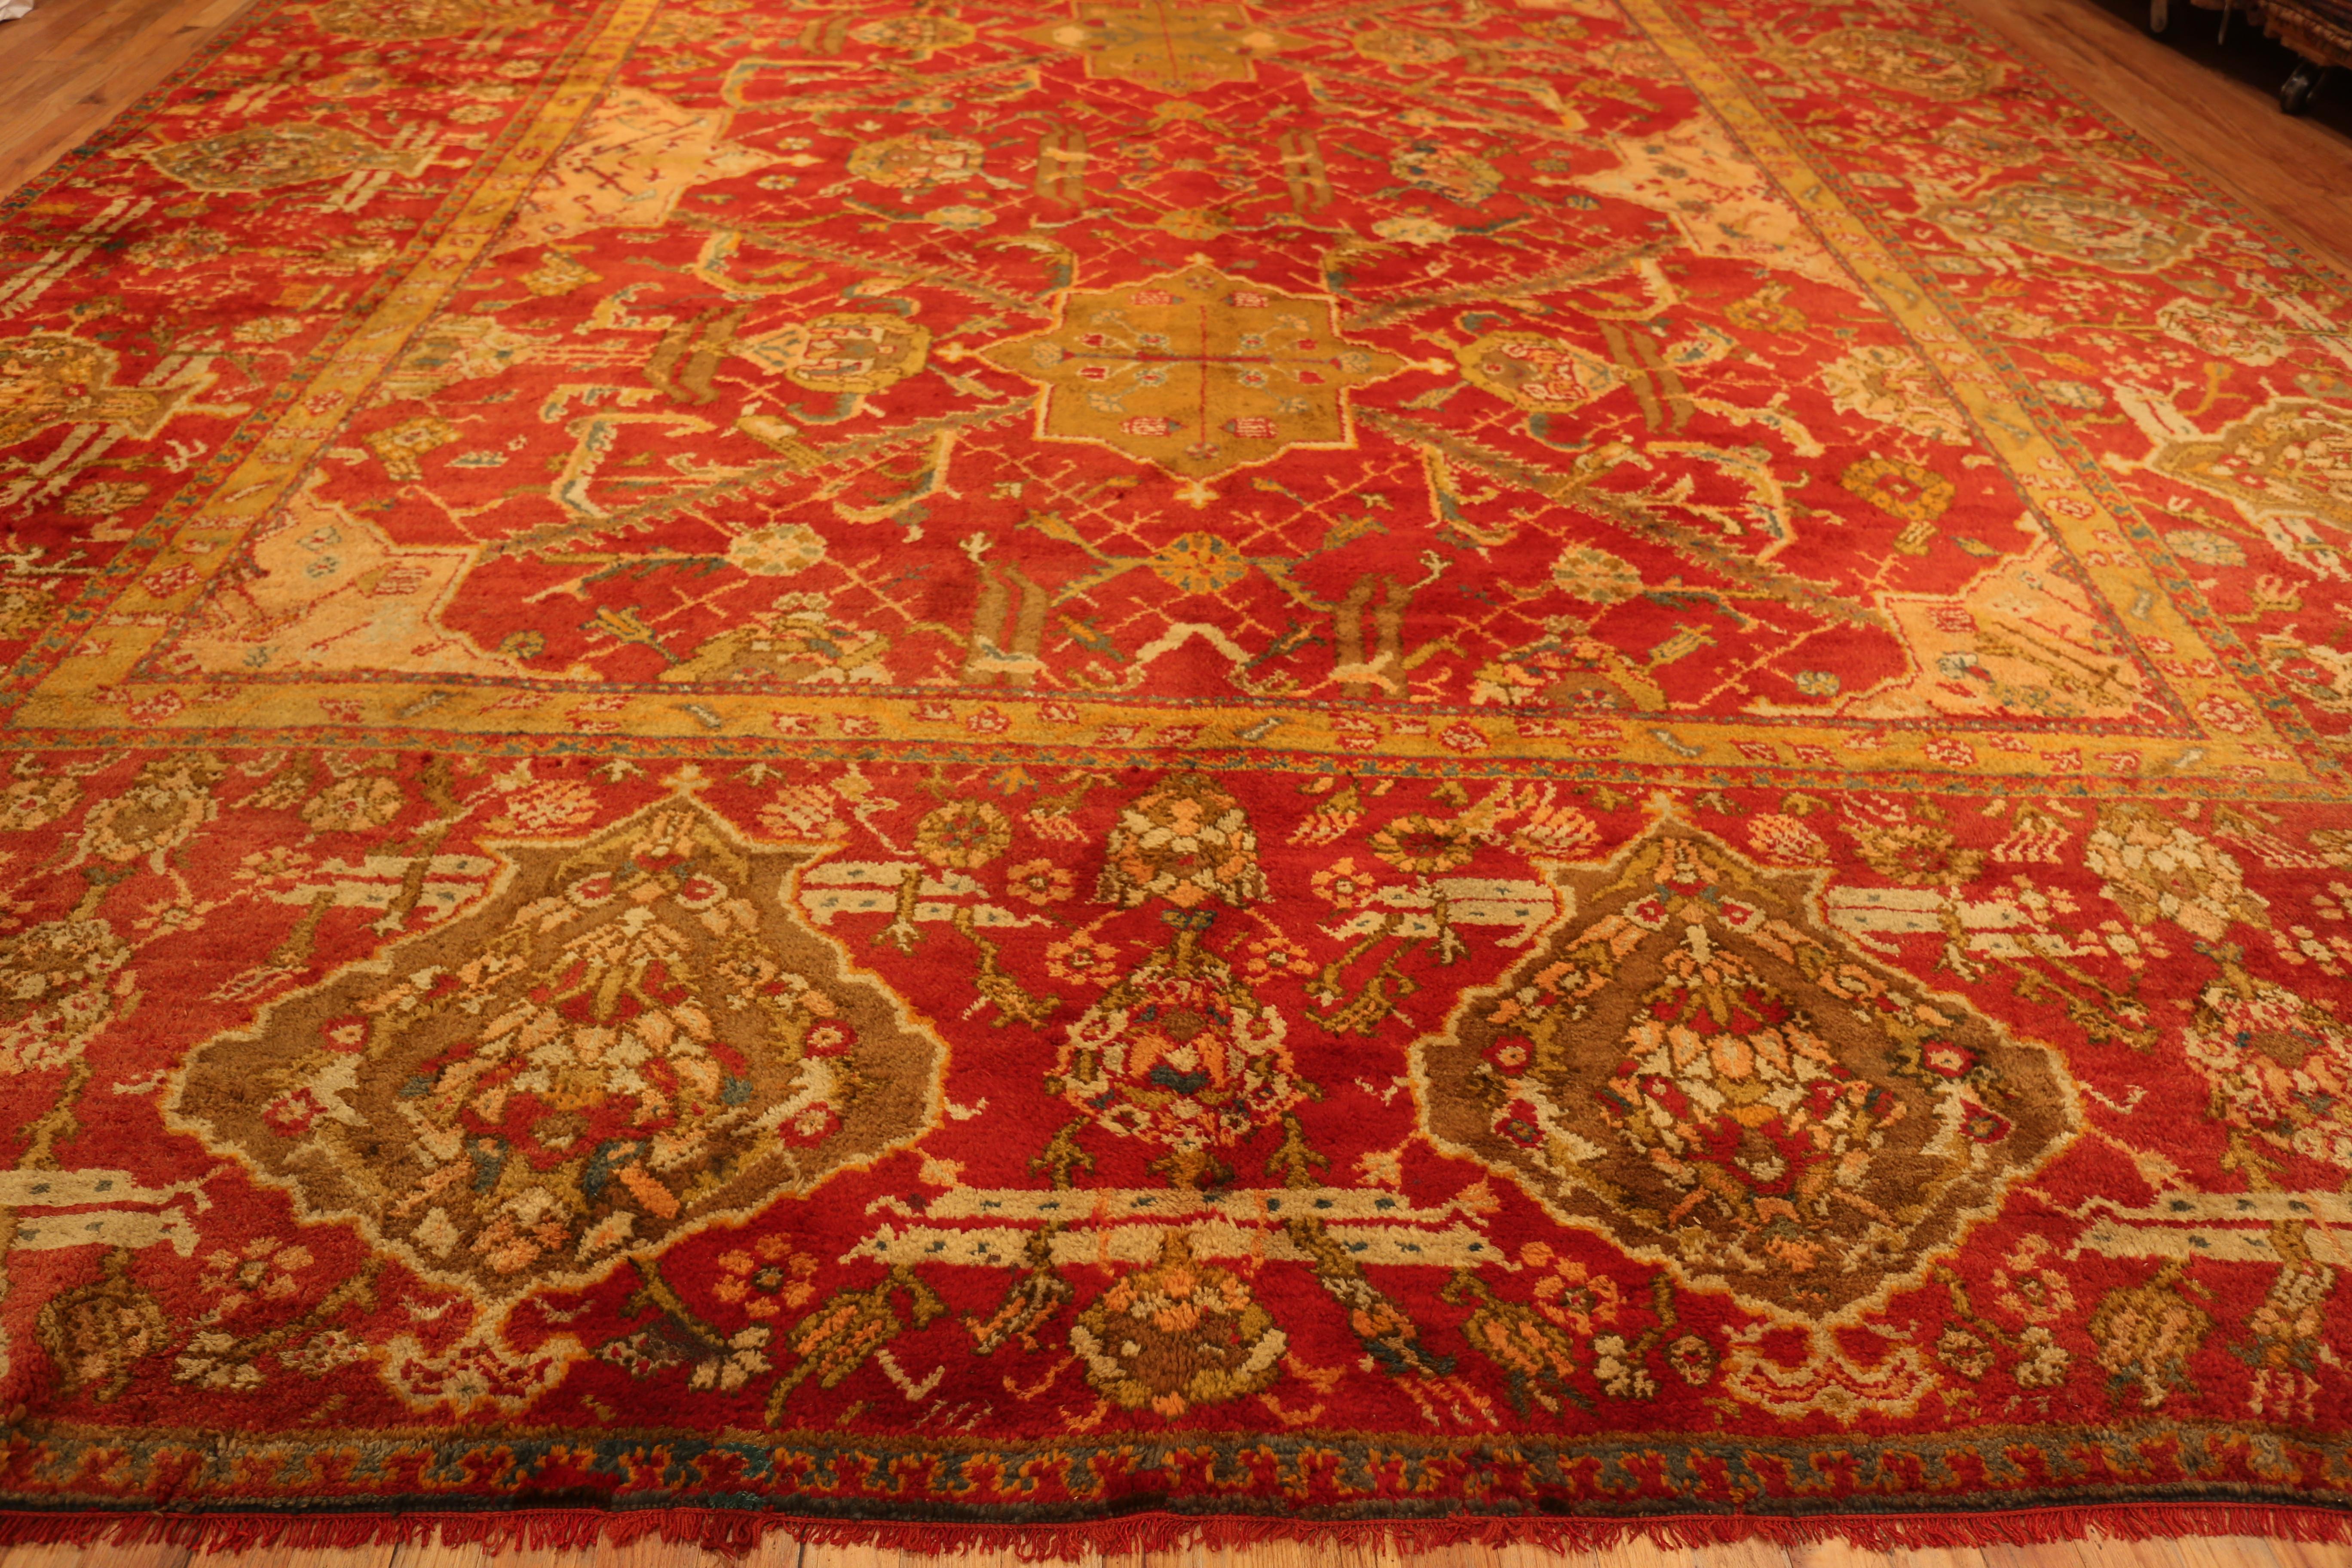 Large Antique Turkish Oushak Rug, Country of origin / rug type: Turkish rugs, Circa date: 1900. Size: 16 ft 4 in x 20 ft (4.98 m x 6.1 m)

